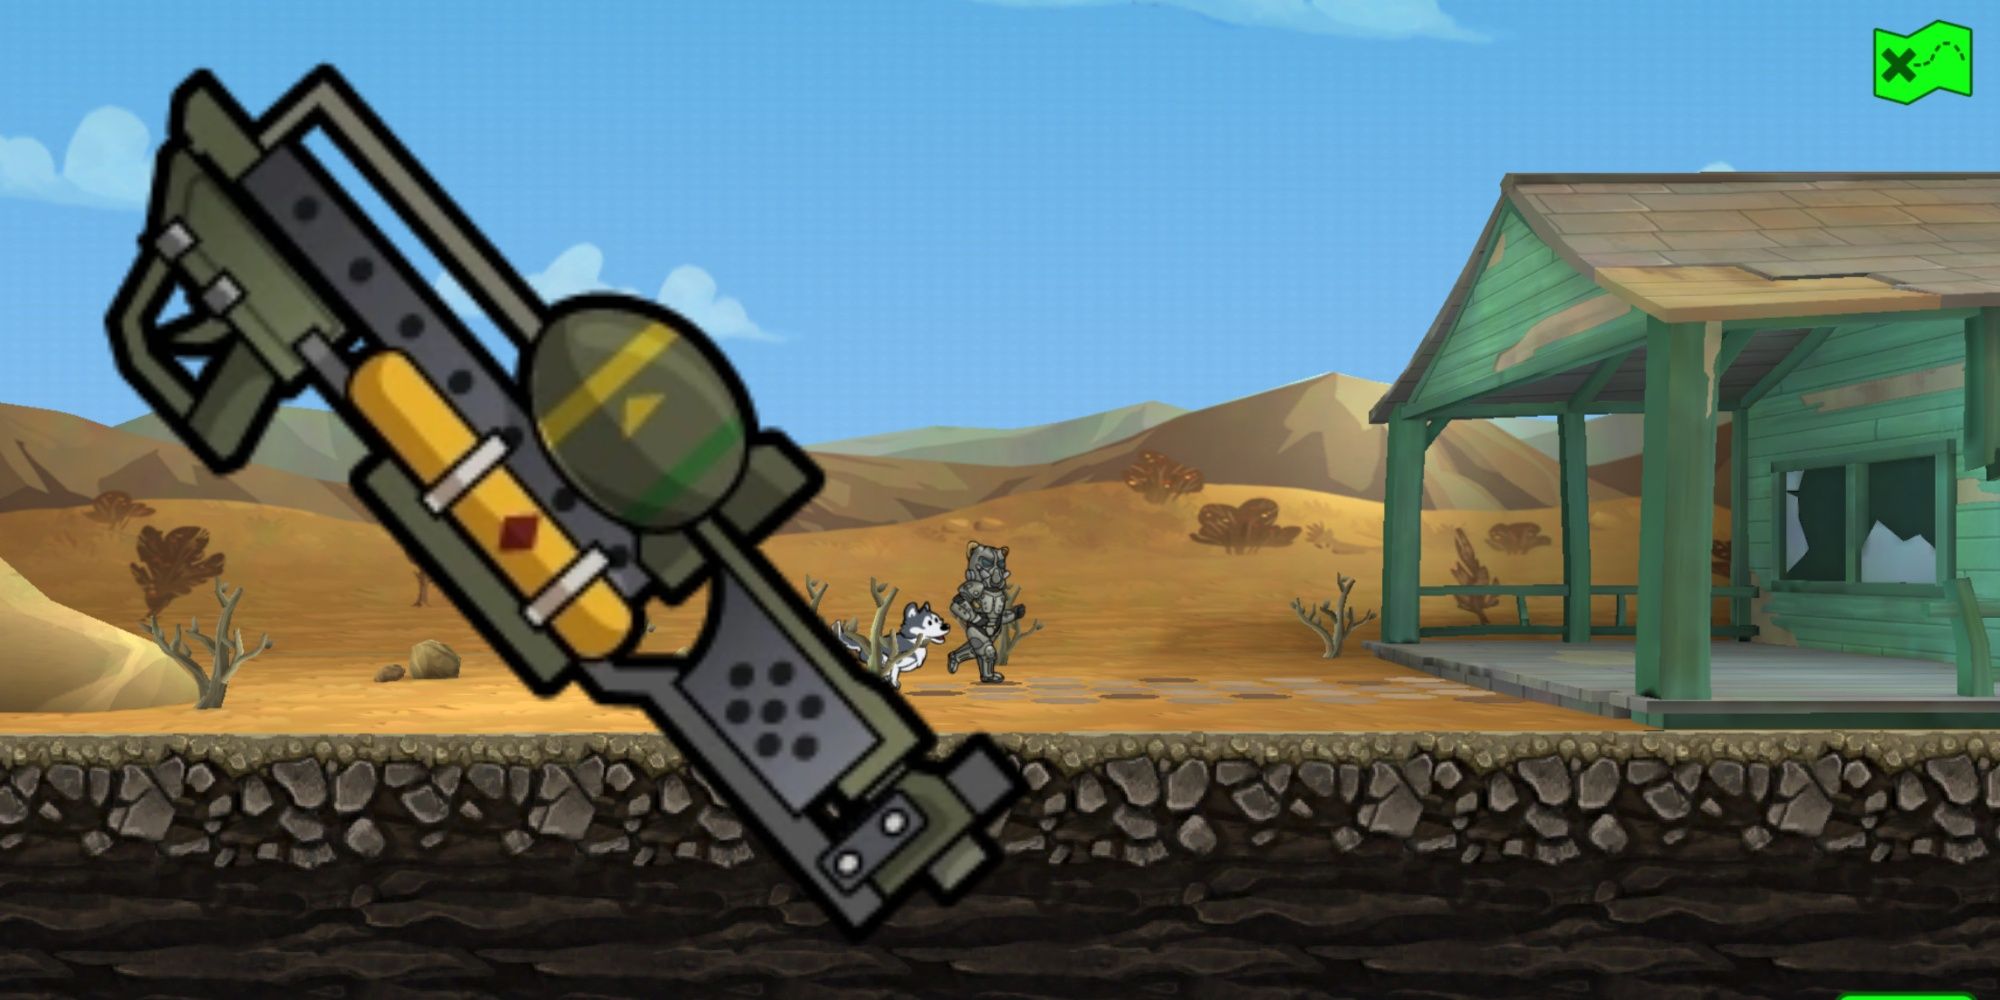 MIRV Weapon In Fallout Shelter